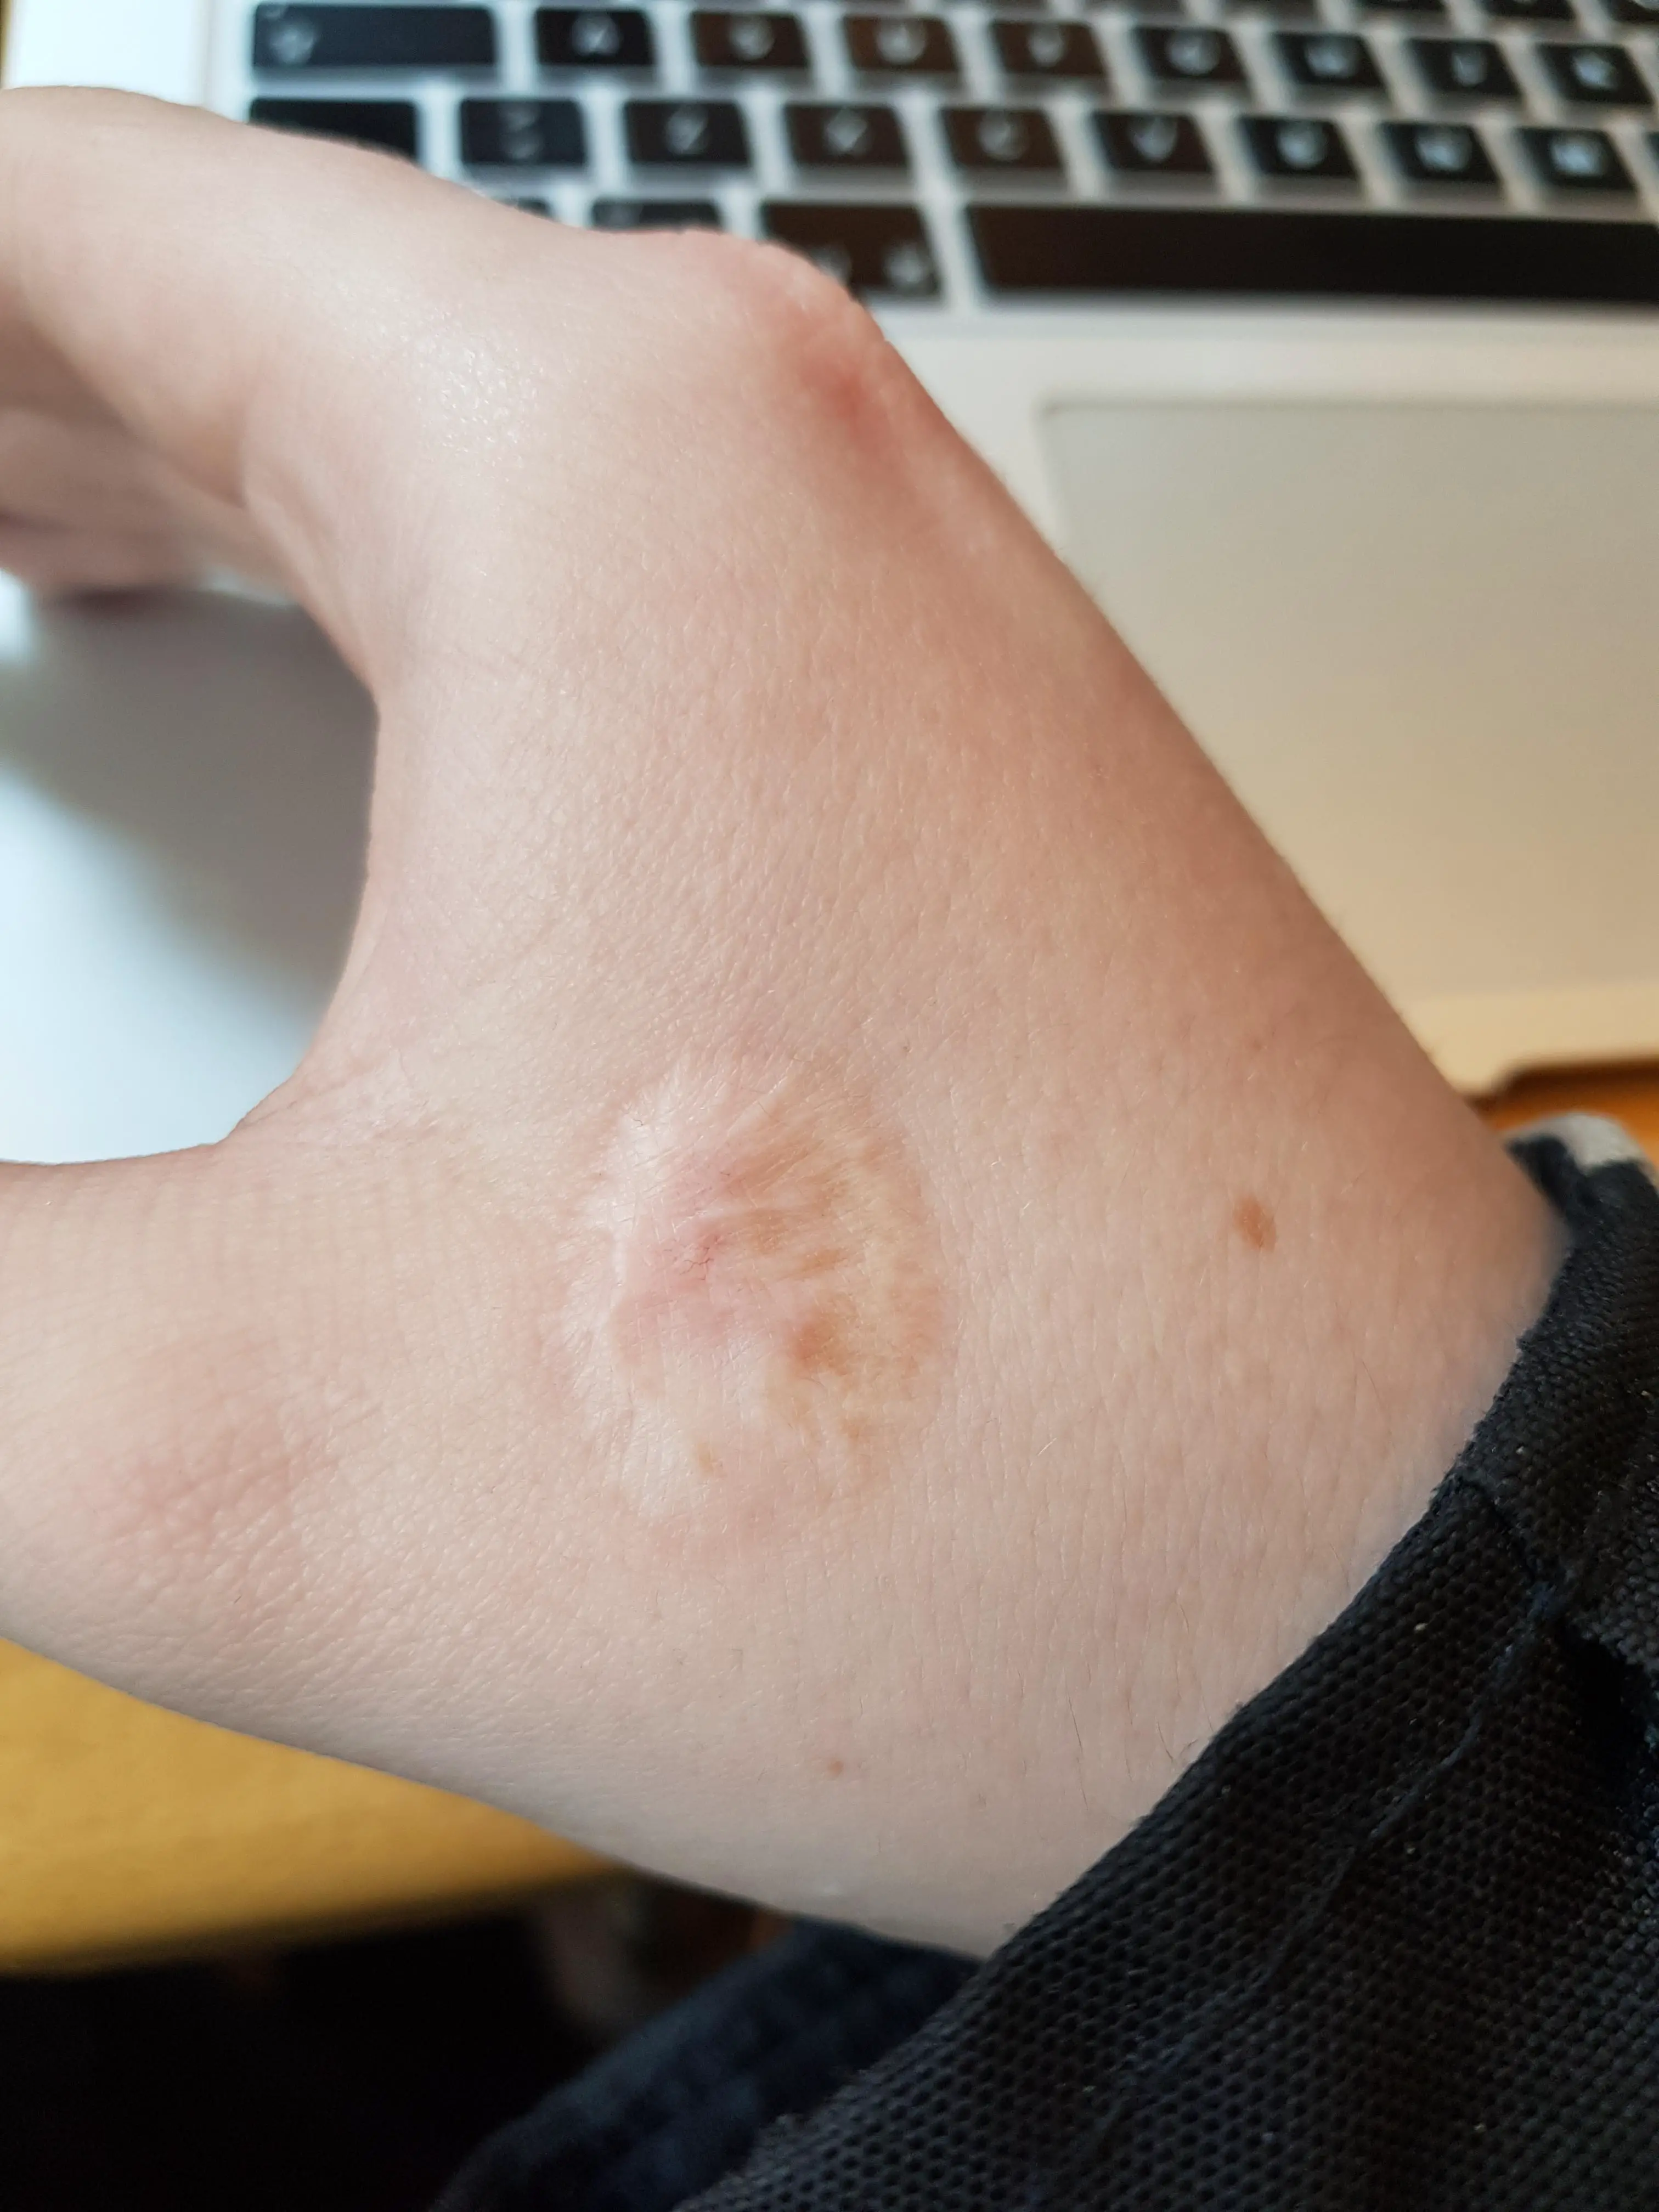 What Happens If You Get Hot Glue On Your Skin